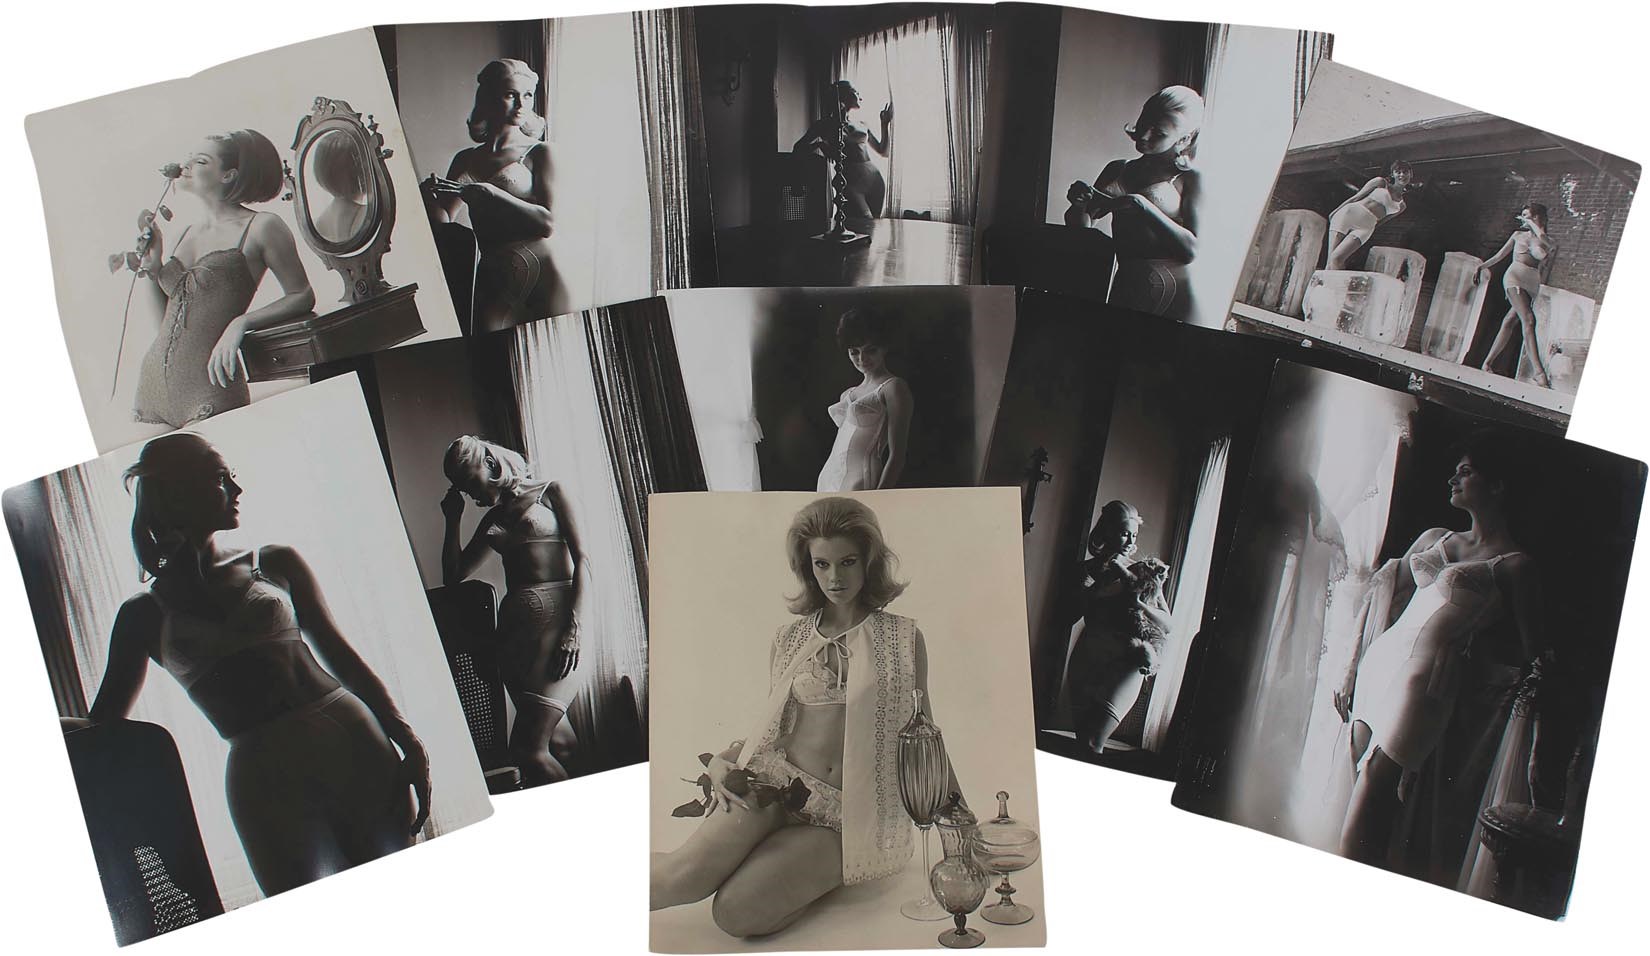 Rock And Pop Culture - The Solowinski Archive: Photographs & Fashion from Richard Avedon Associate (10,000+ pieces)